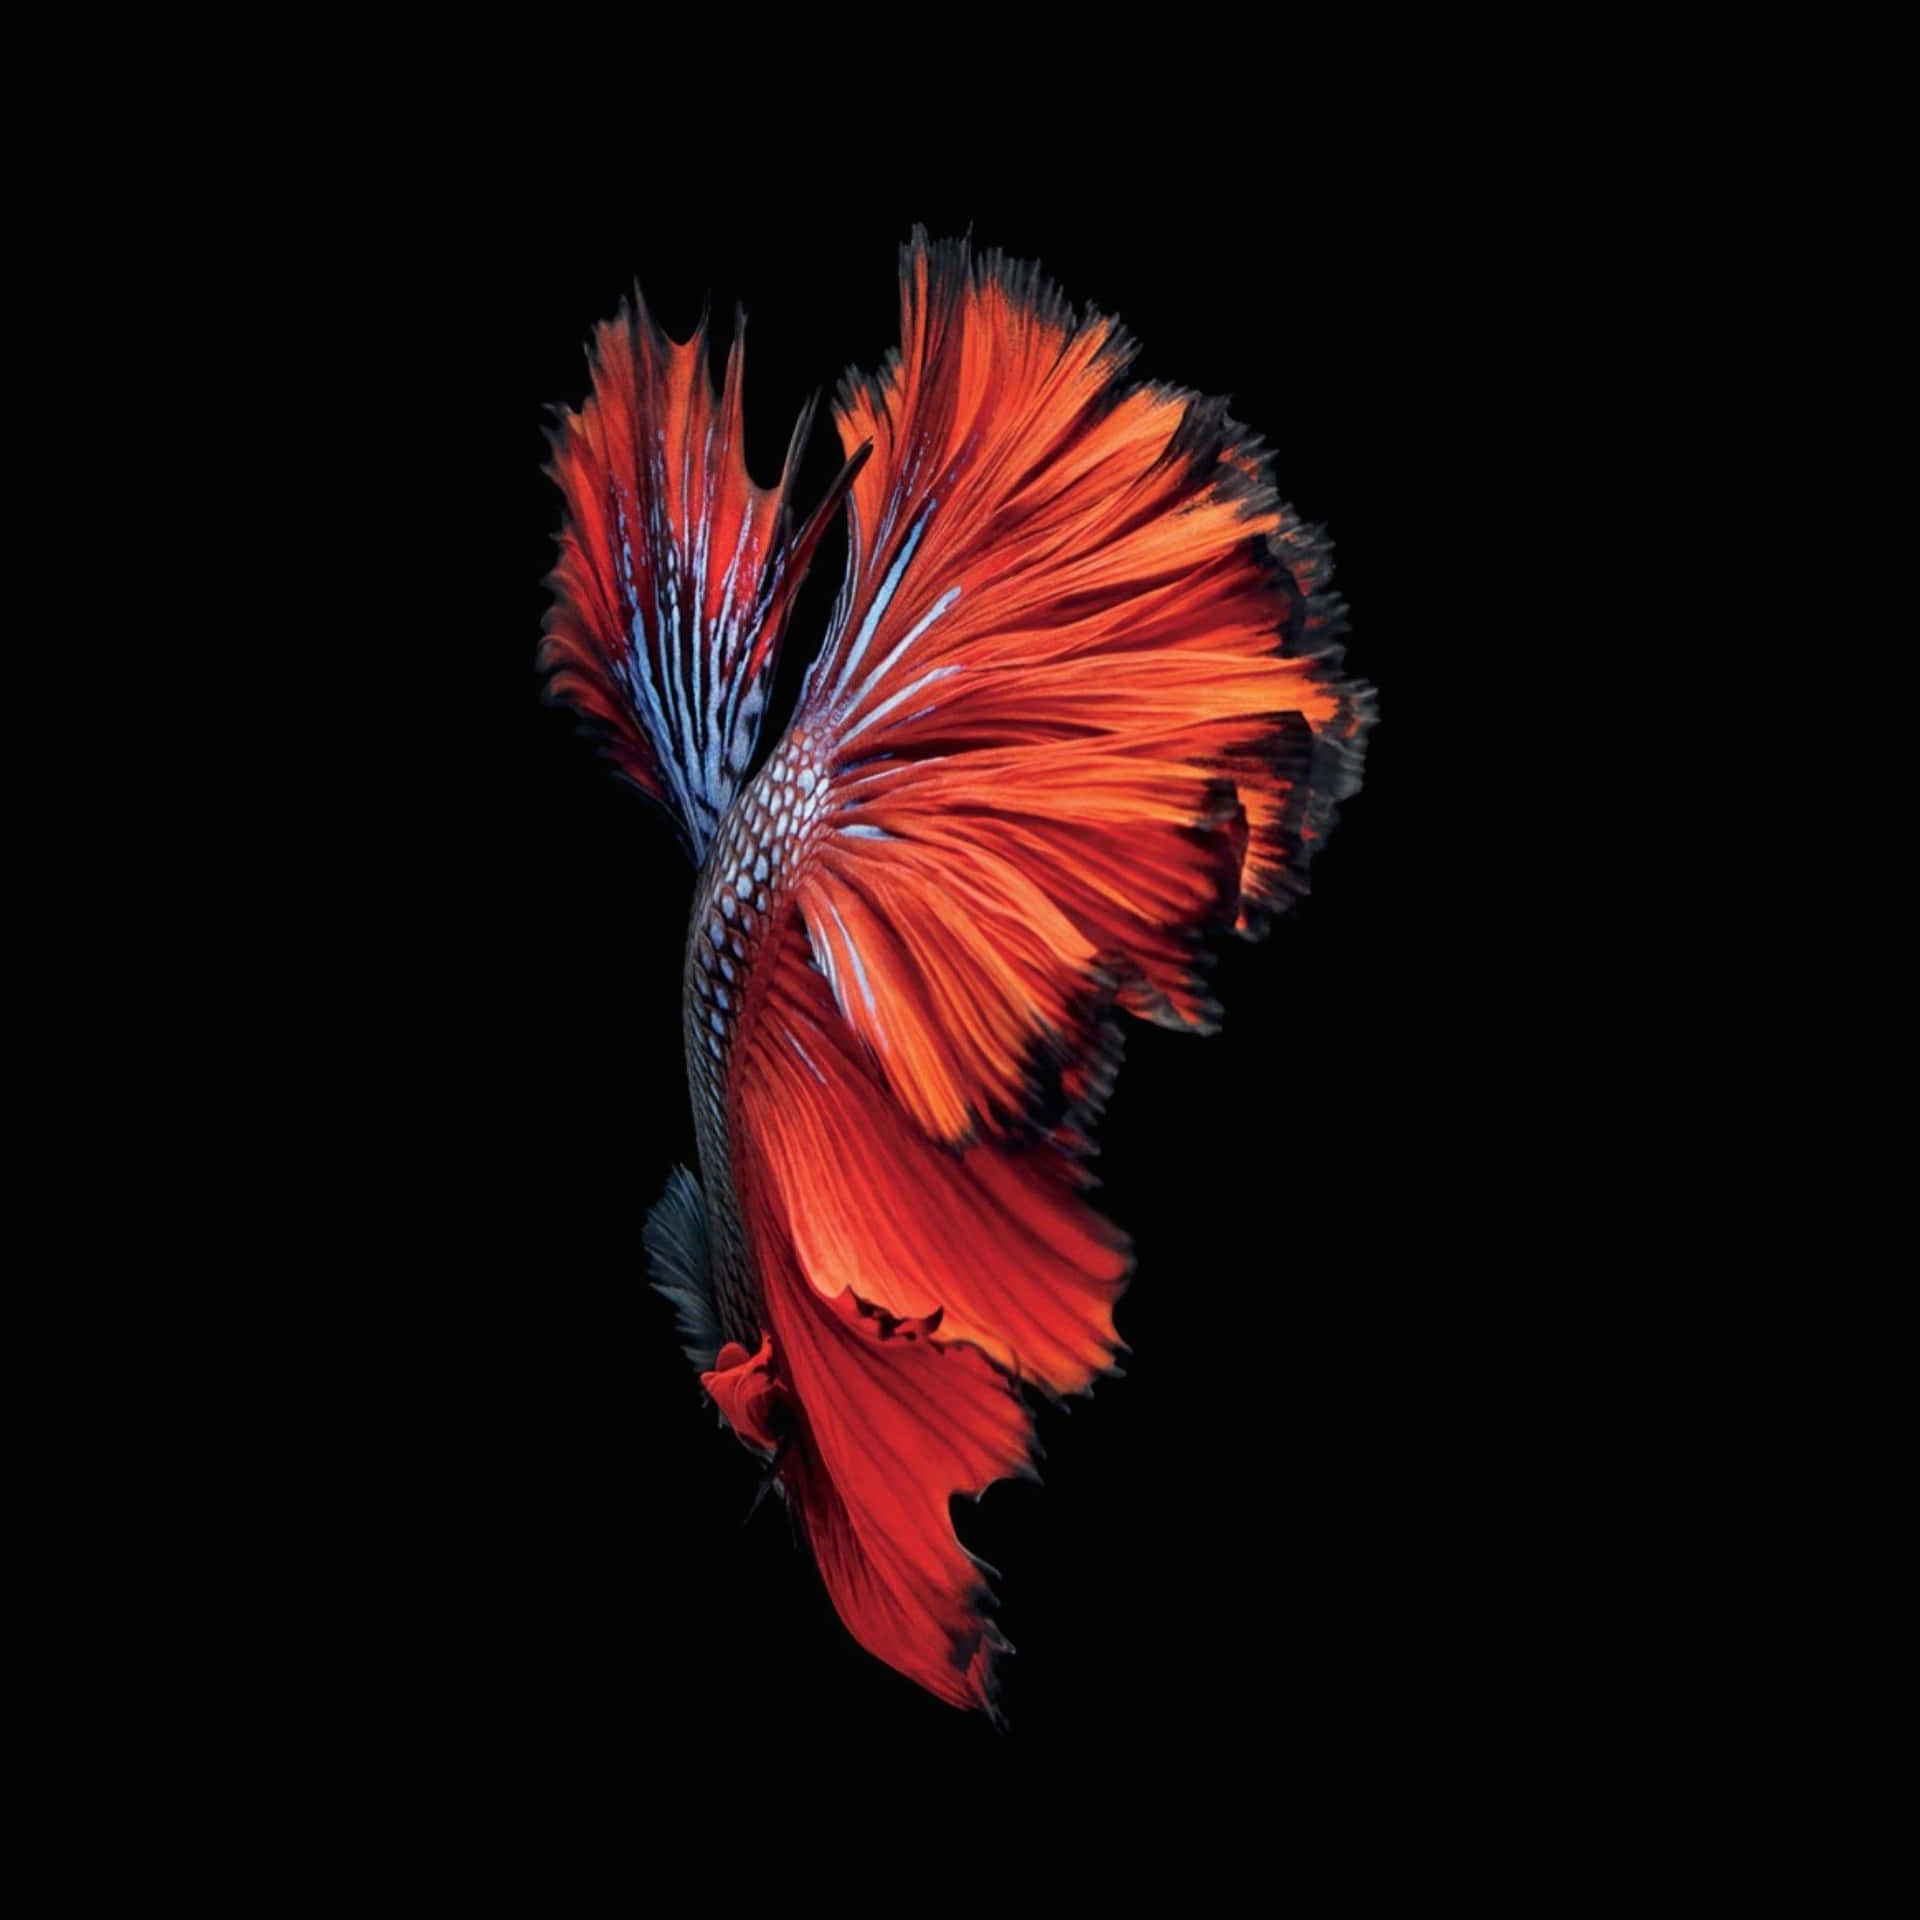 A Siamese Fish With Red And Blue Feathers